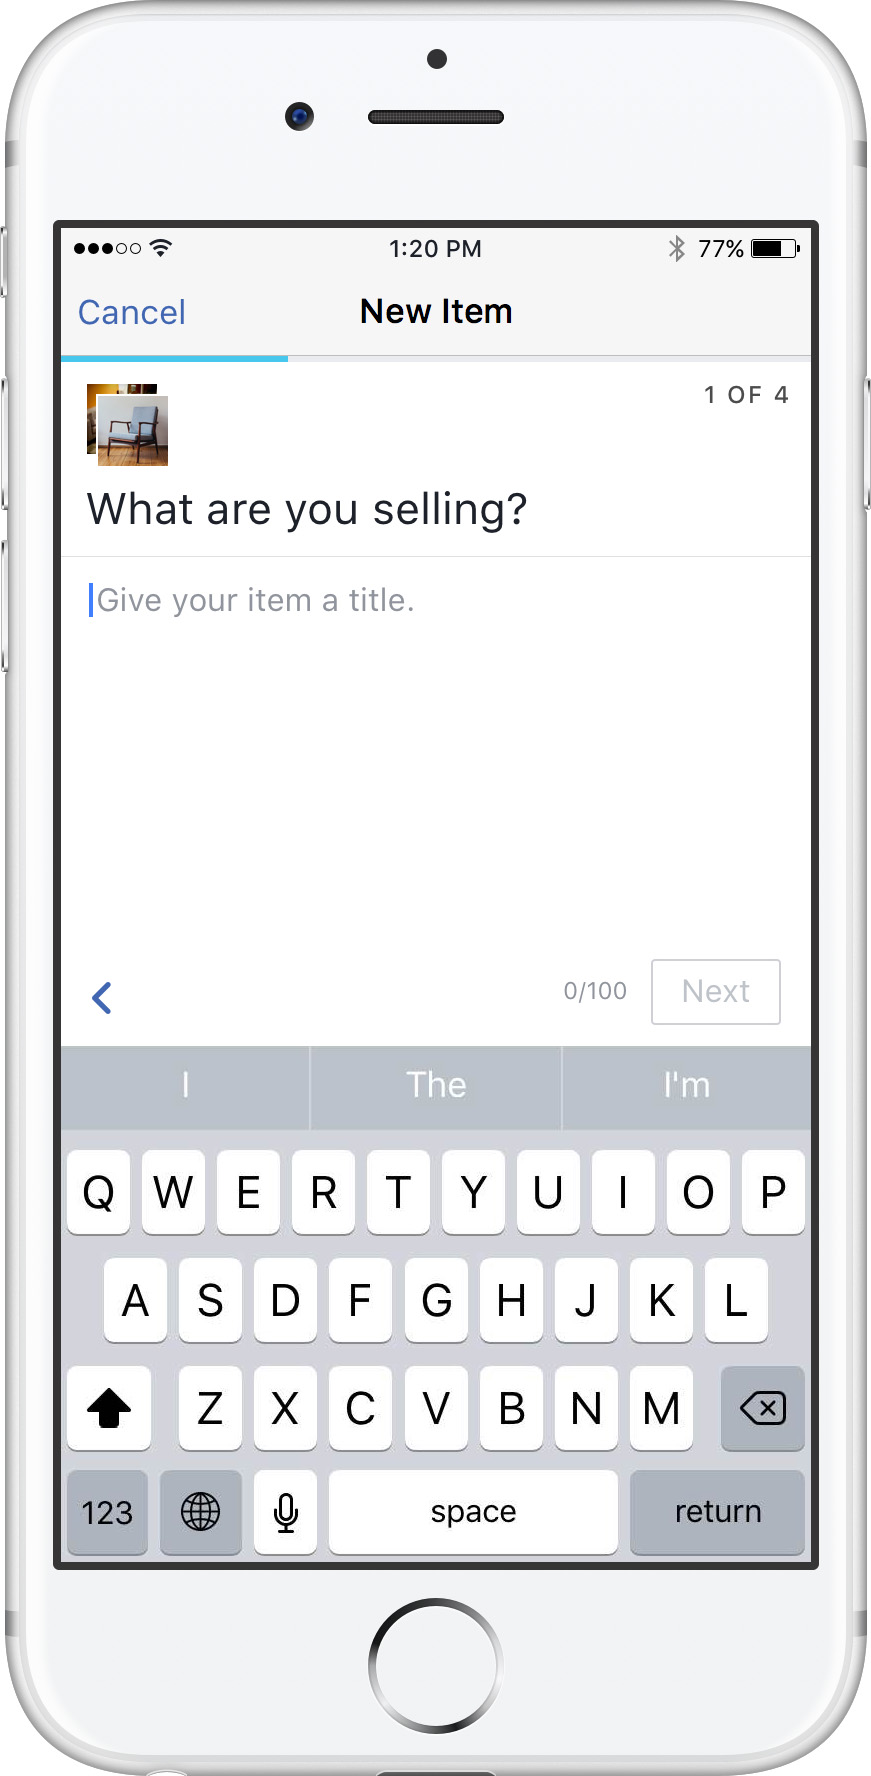 Facebook Launches Marketplace to Rival Craigslist [Video]